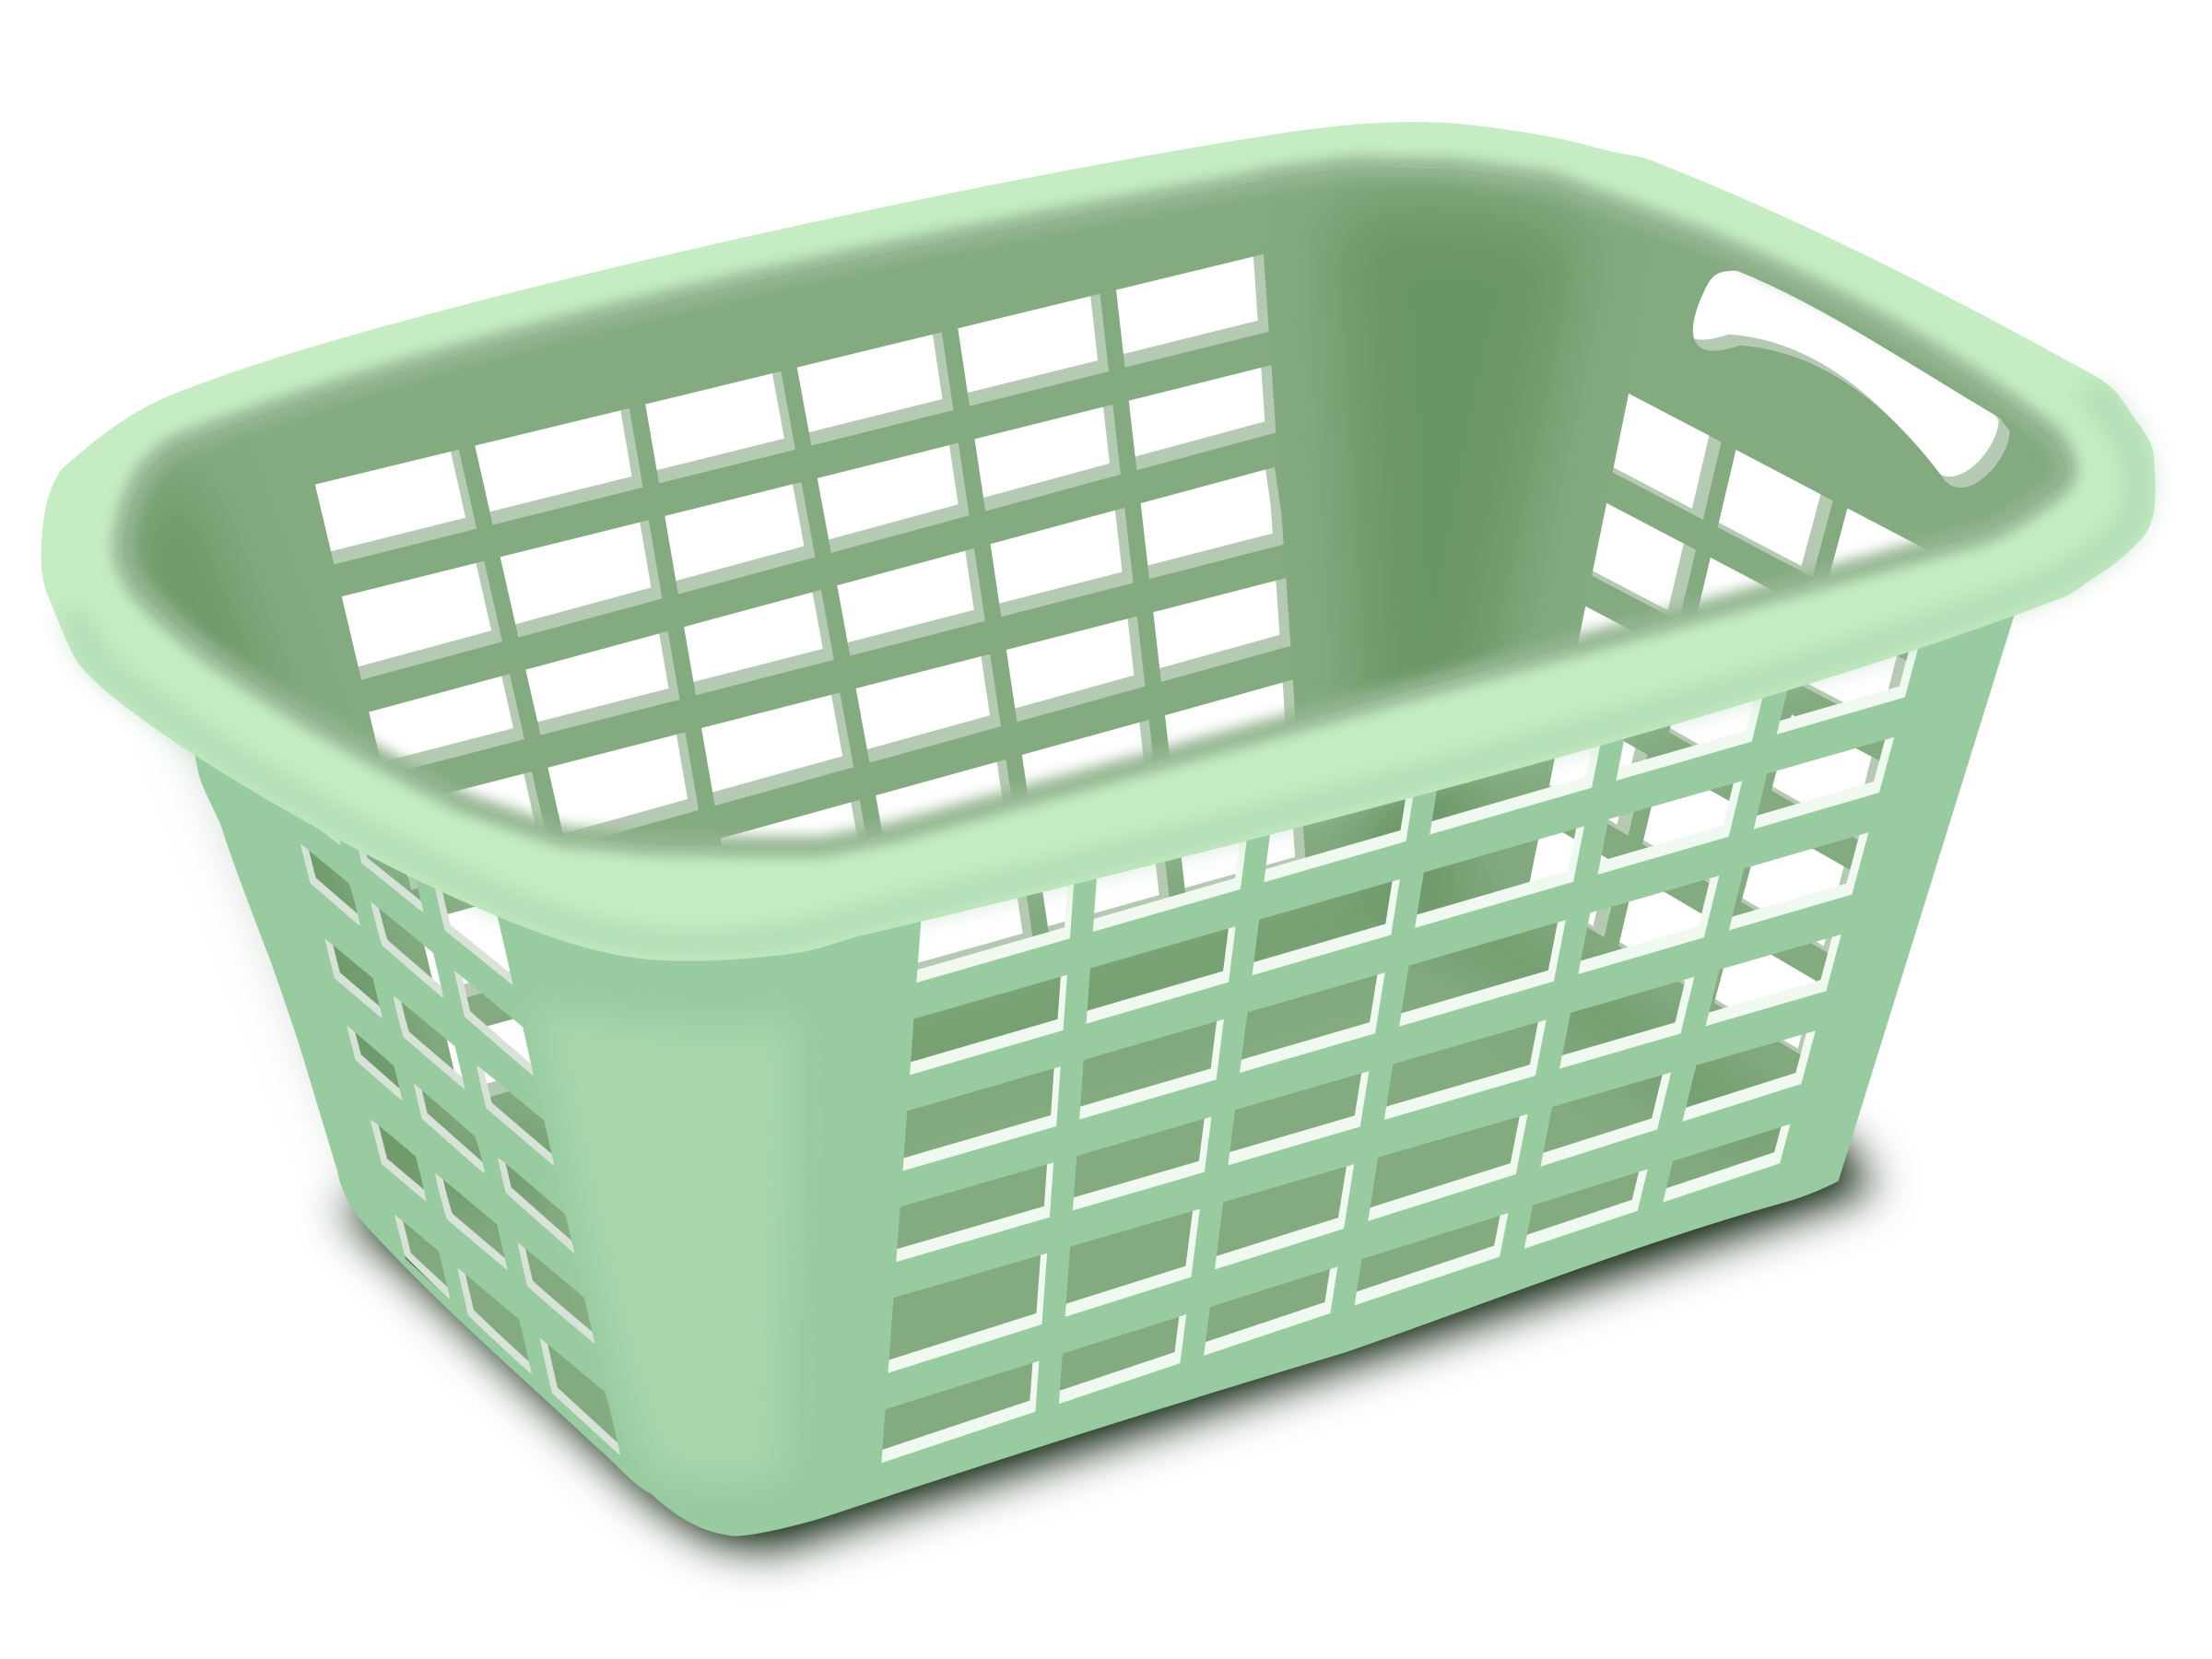 Clip Arts Related To : laundry basket clipart black and white. view all Clo...